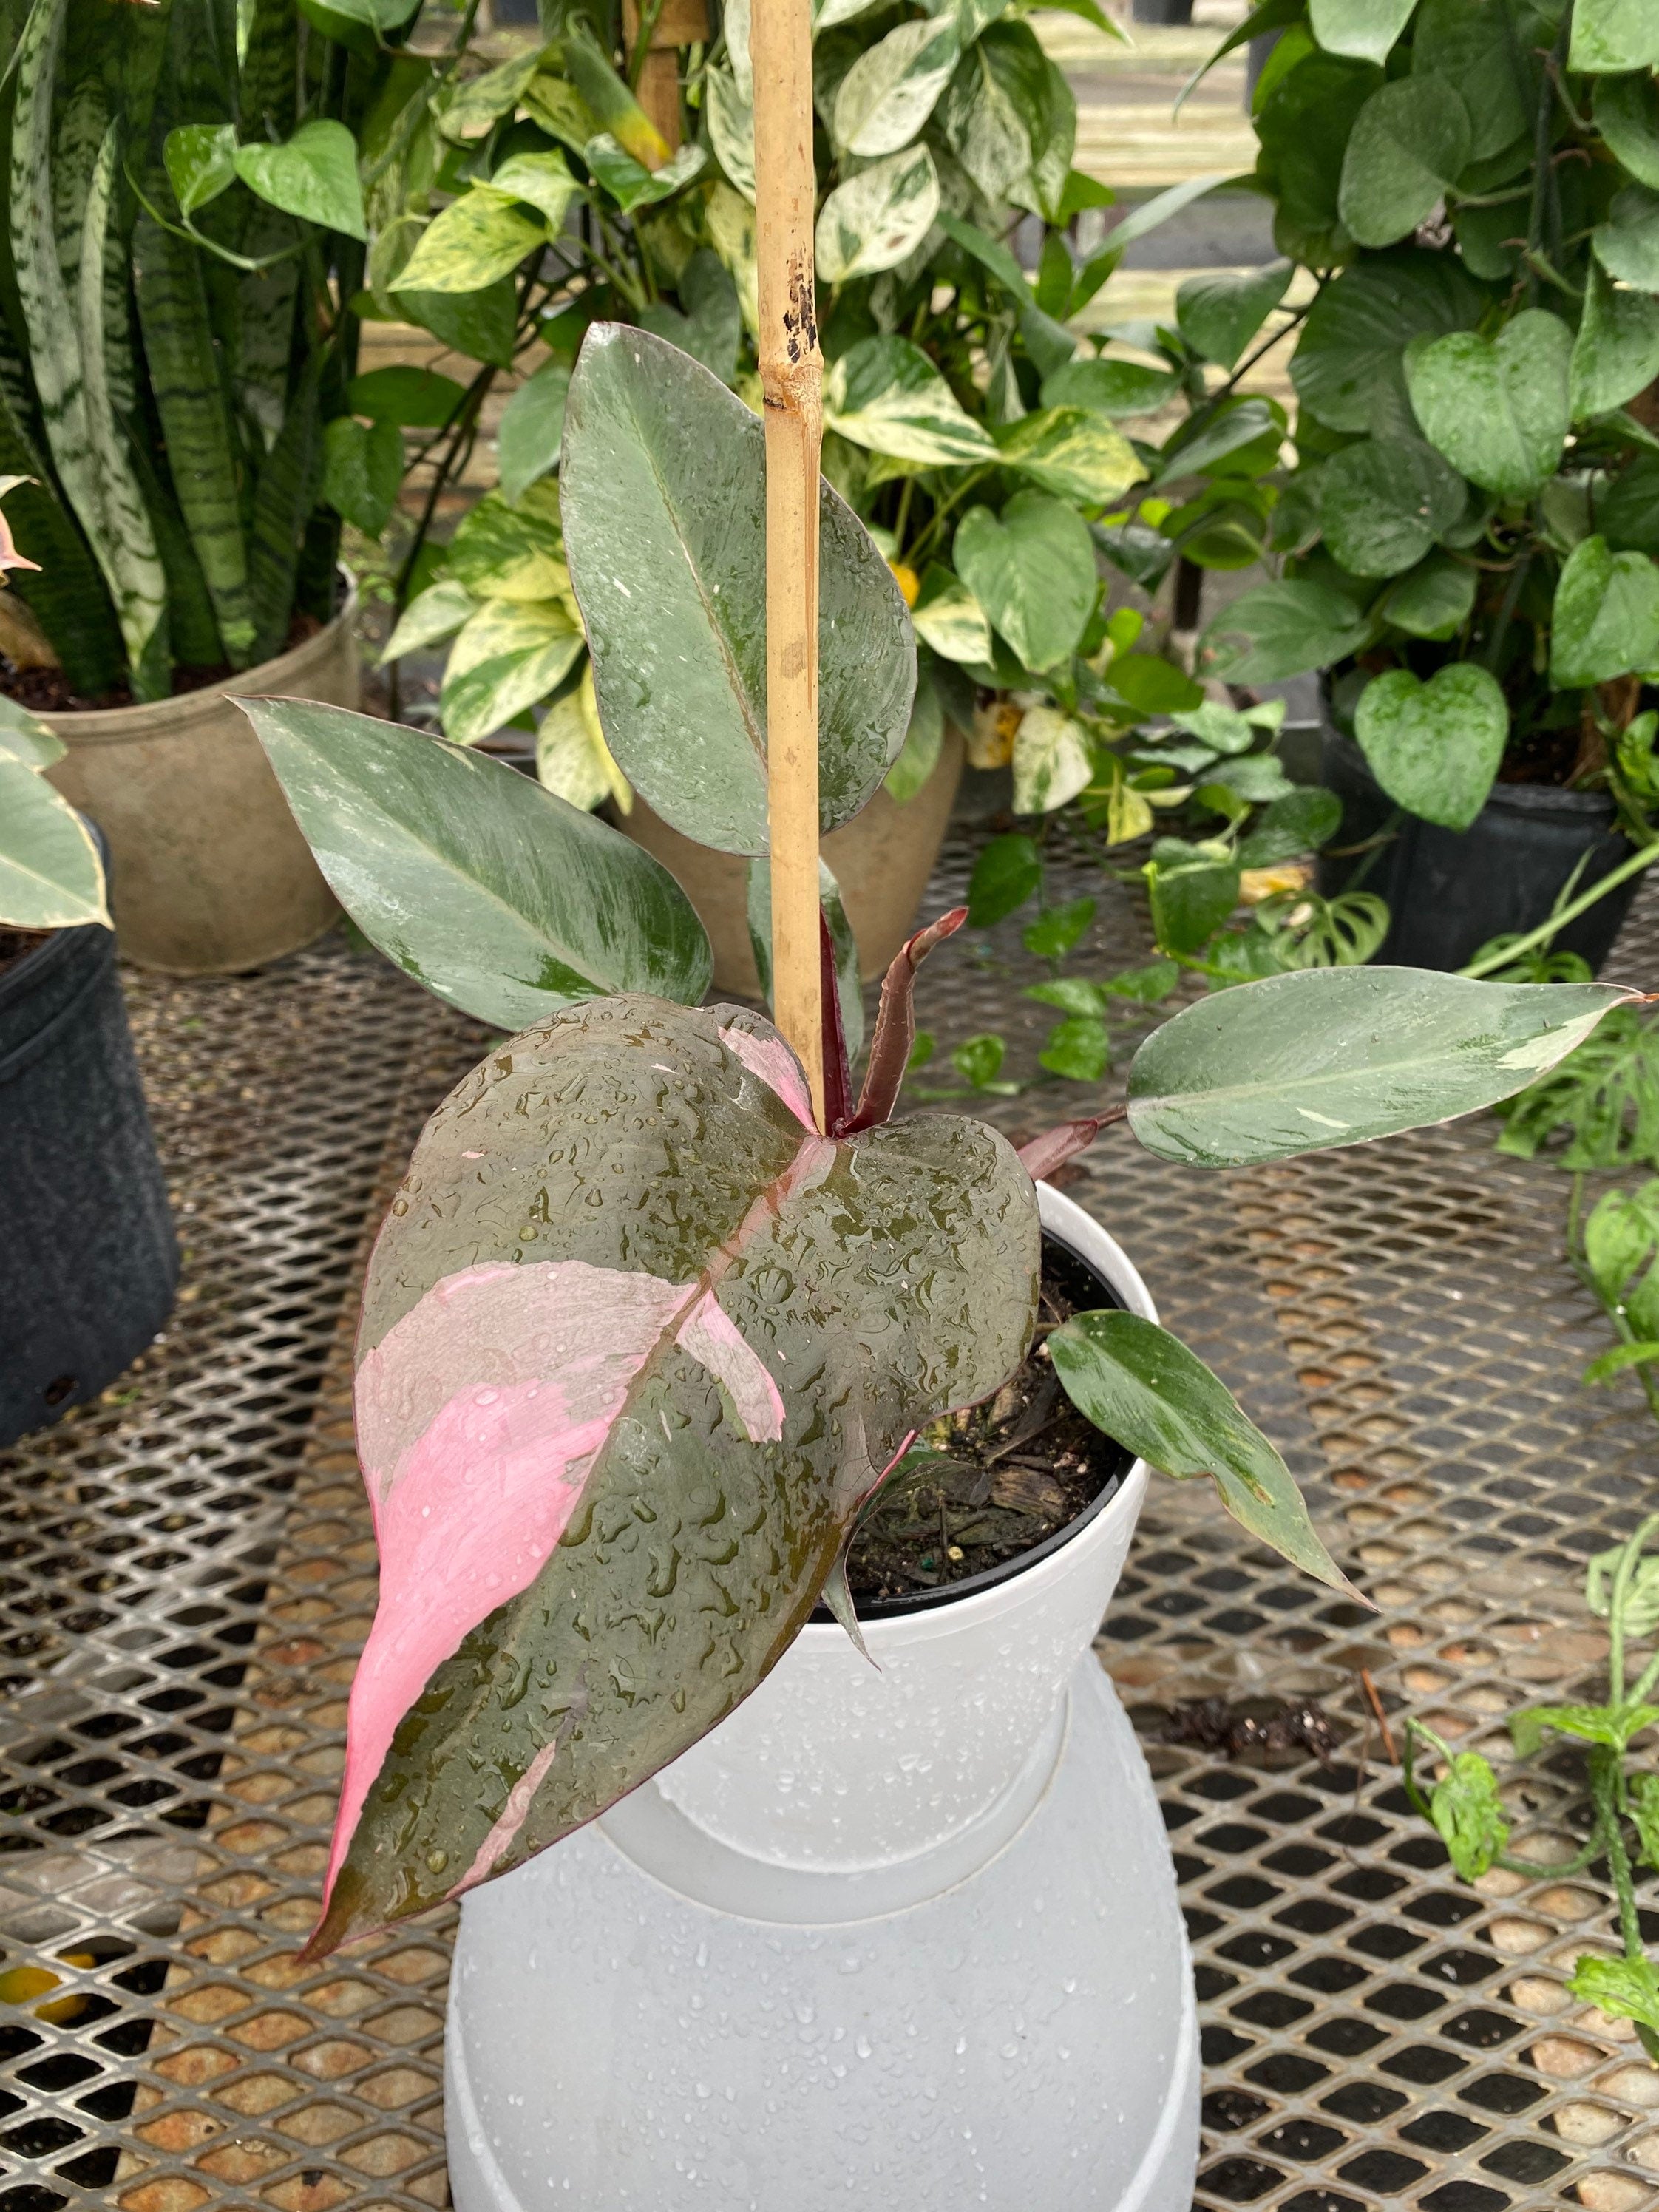 Philodendron Pink Princess in Trellis, Philodendron Erubescens Exotic Plants in a white pot